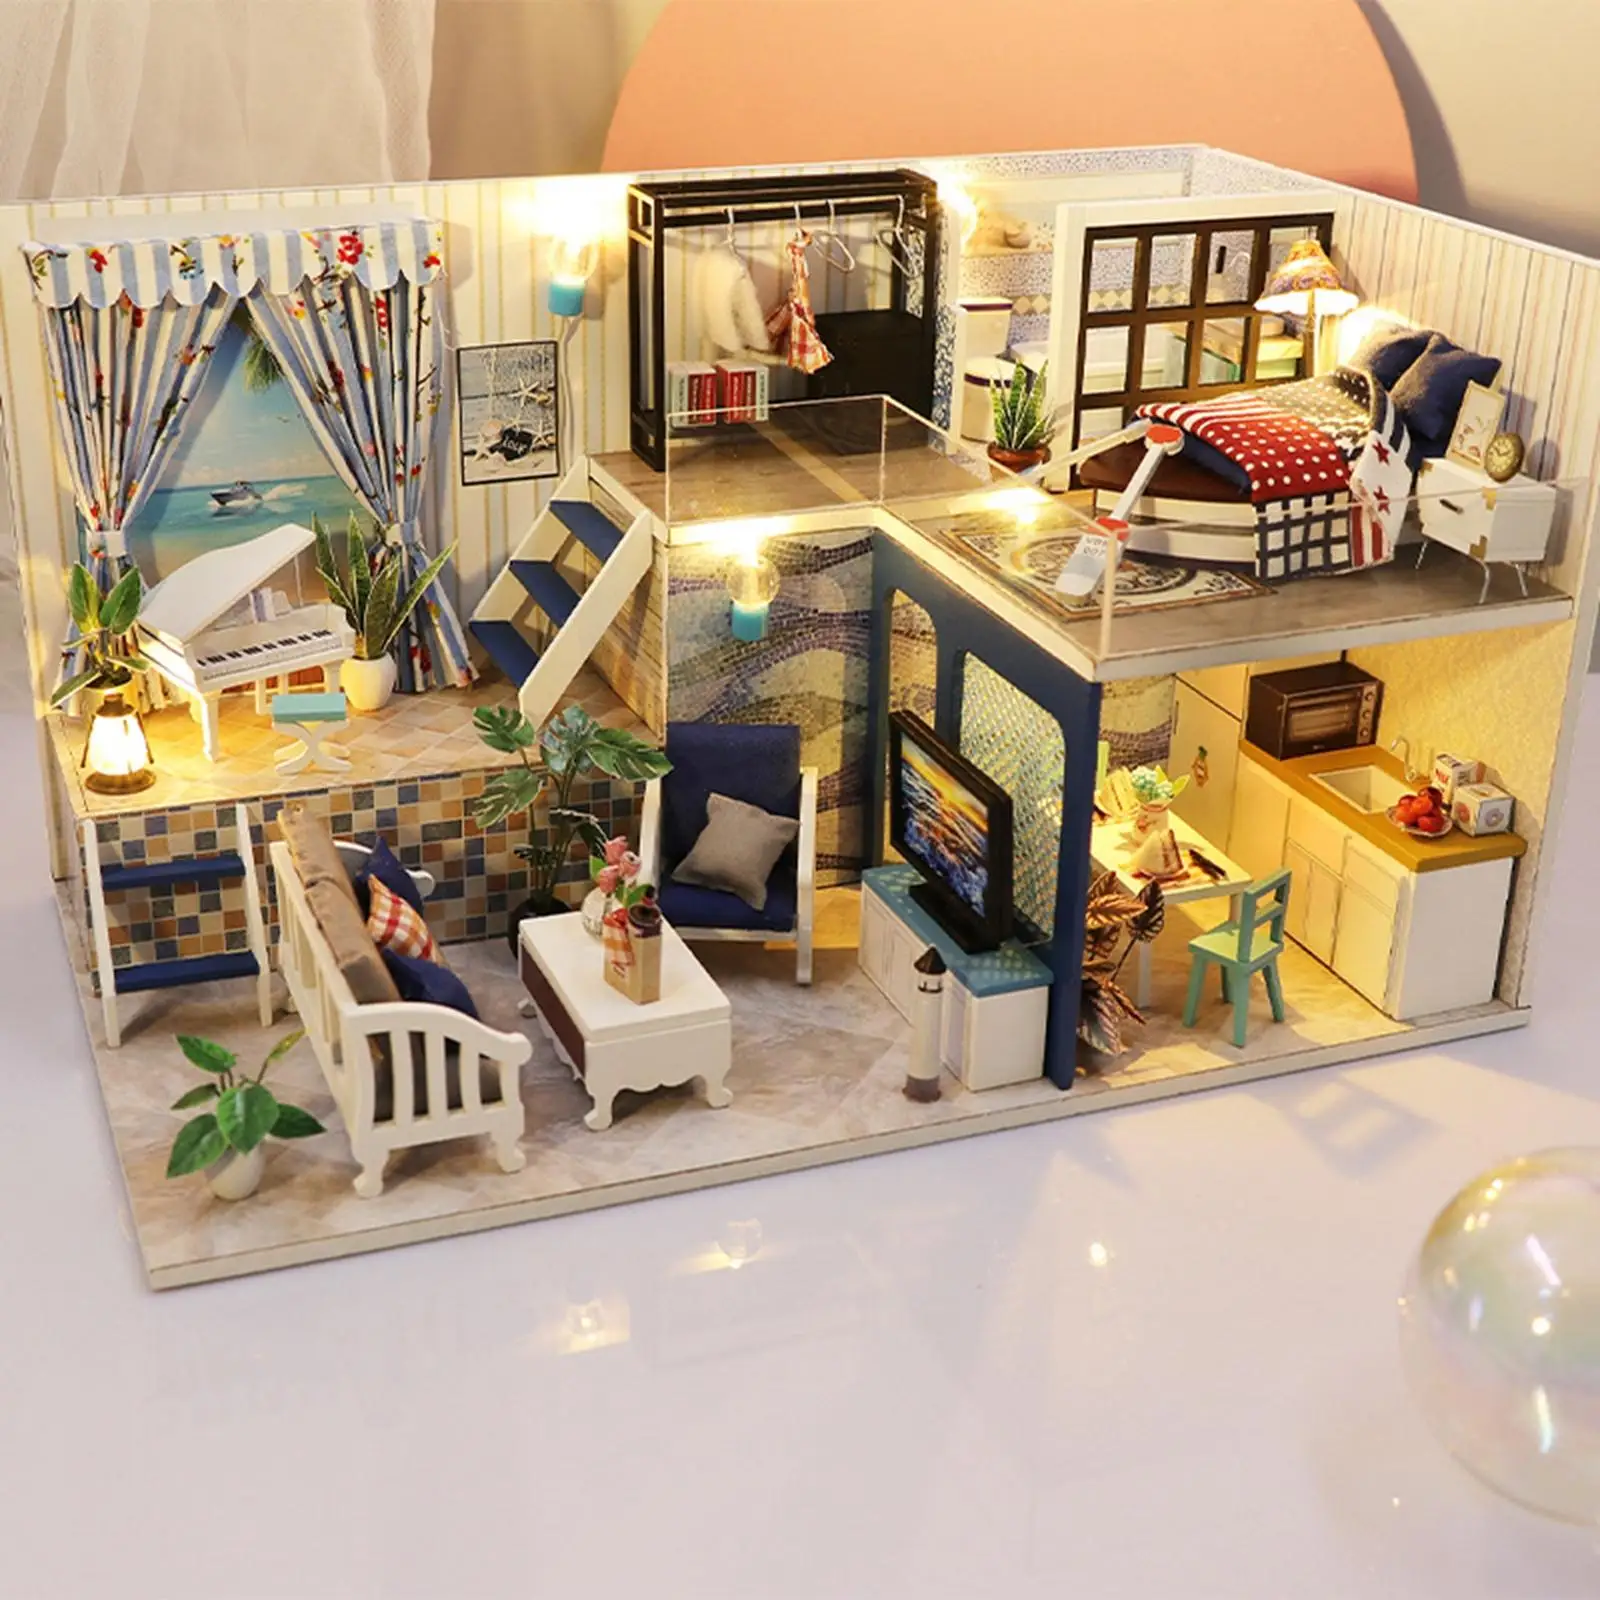 Assemble Kit Exquisite Creative Unfinished with Furniture DIY Miniature dollhouse for Decor Birthday Gift Collectibles